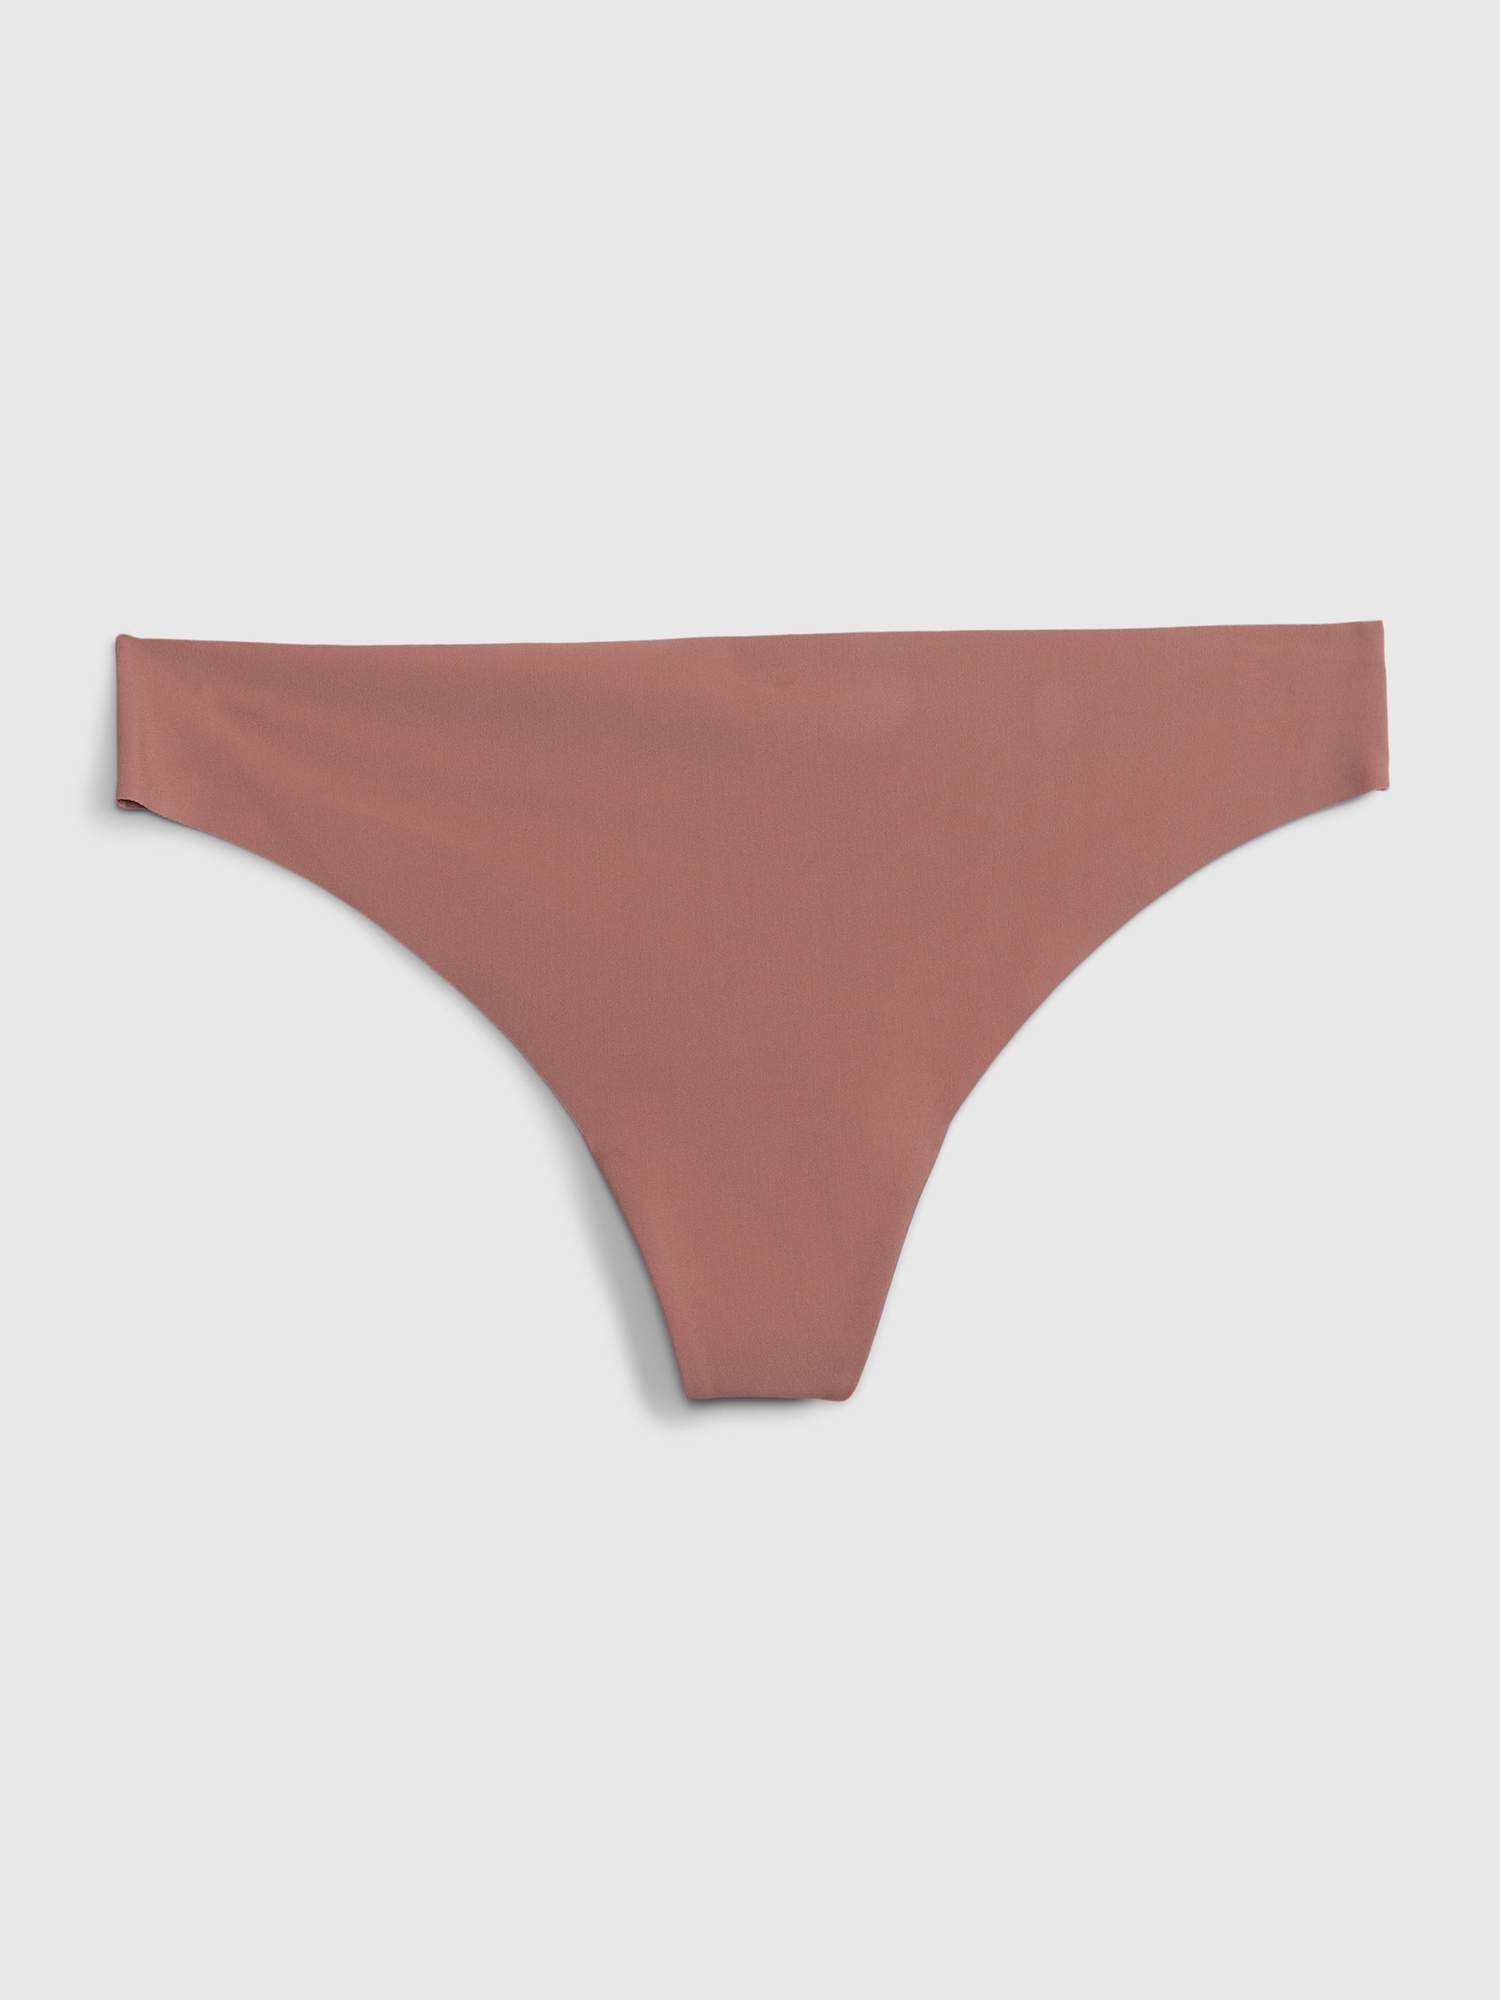 Gap No-show Thong In Mauvey Brown